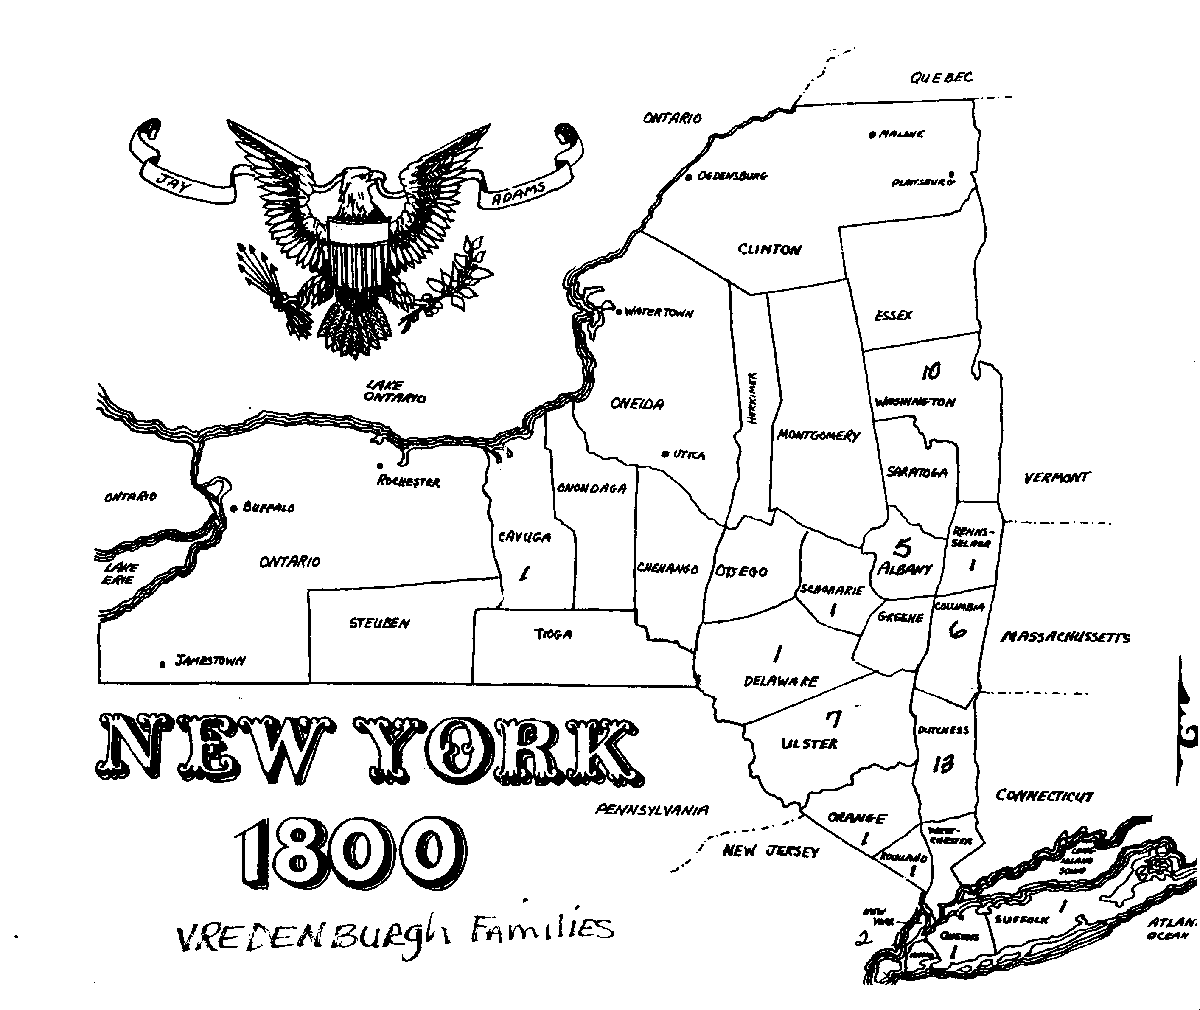 Vredenburgh Families in New York by County in 1800